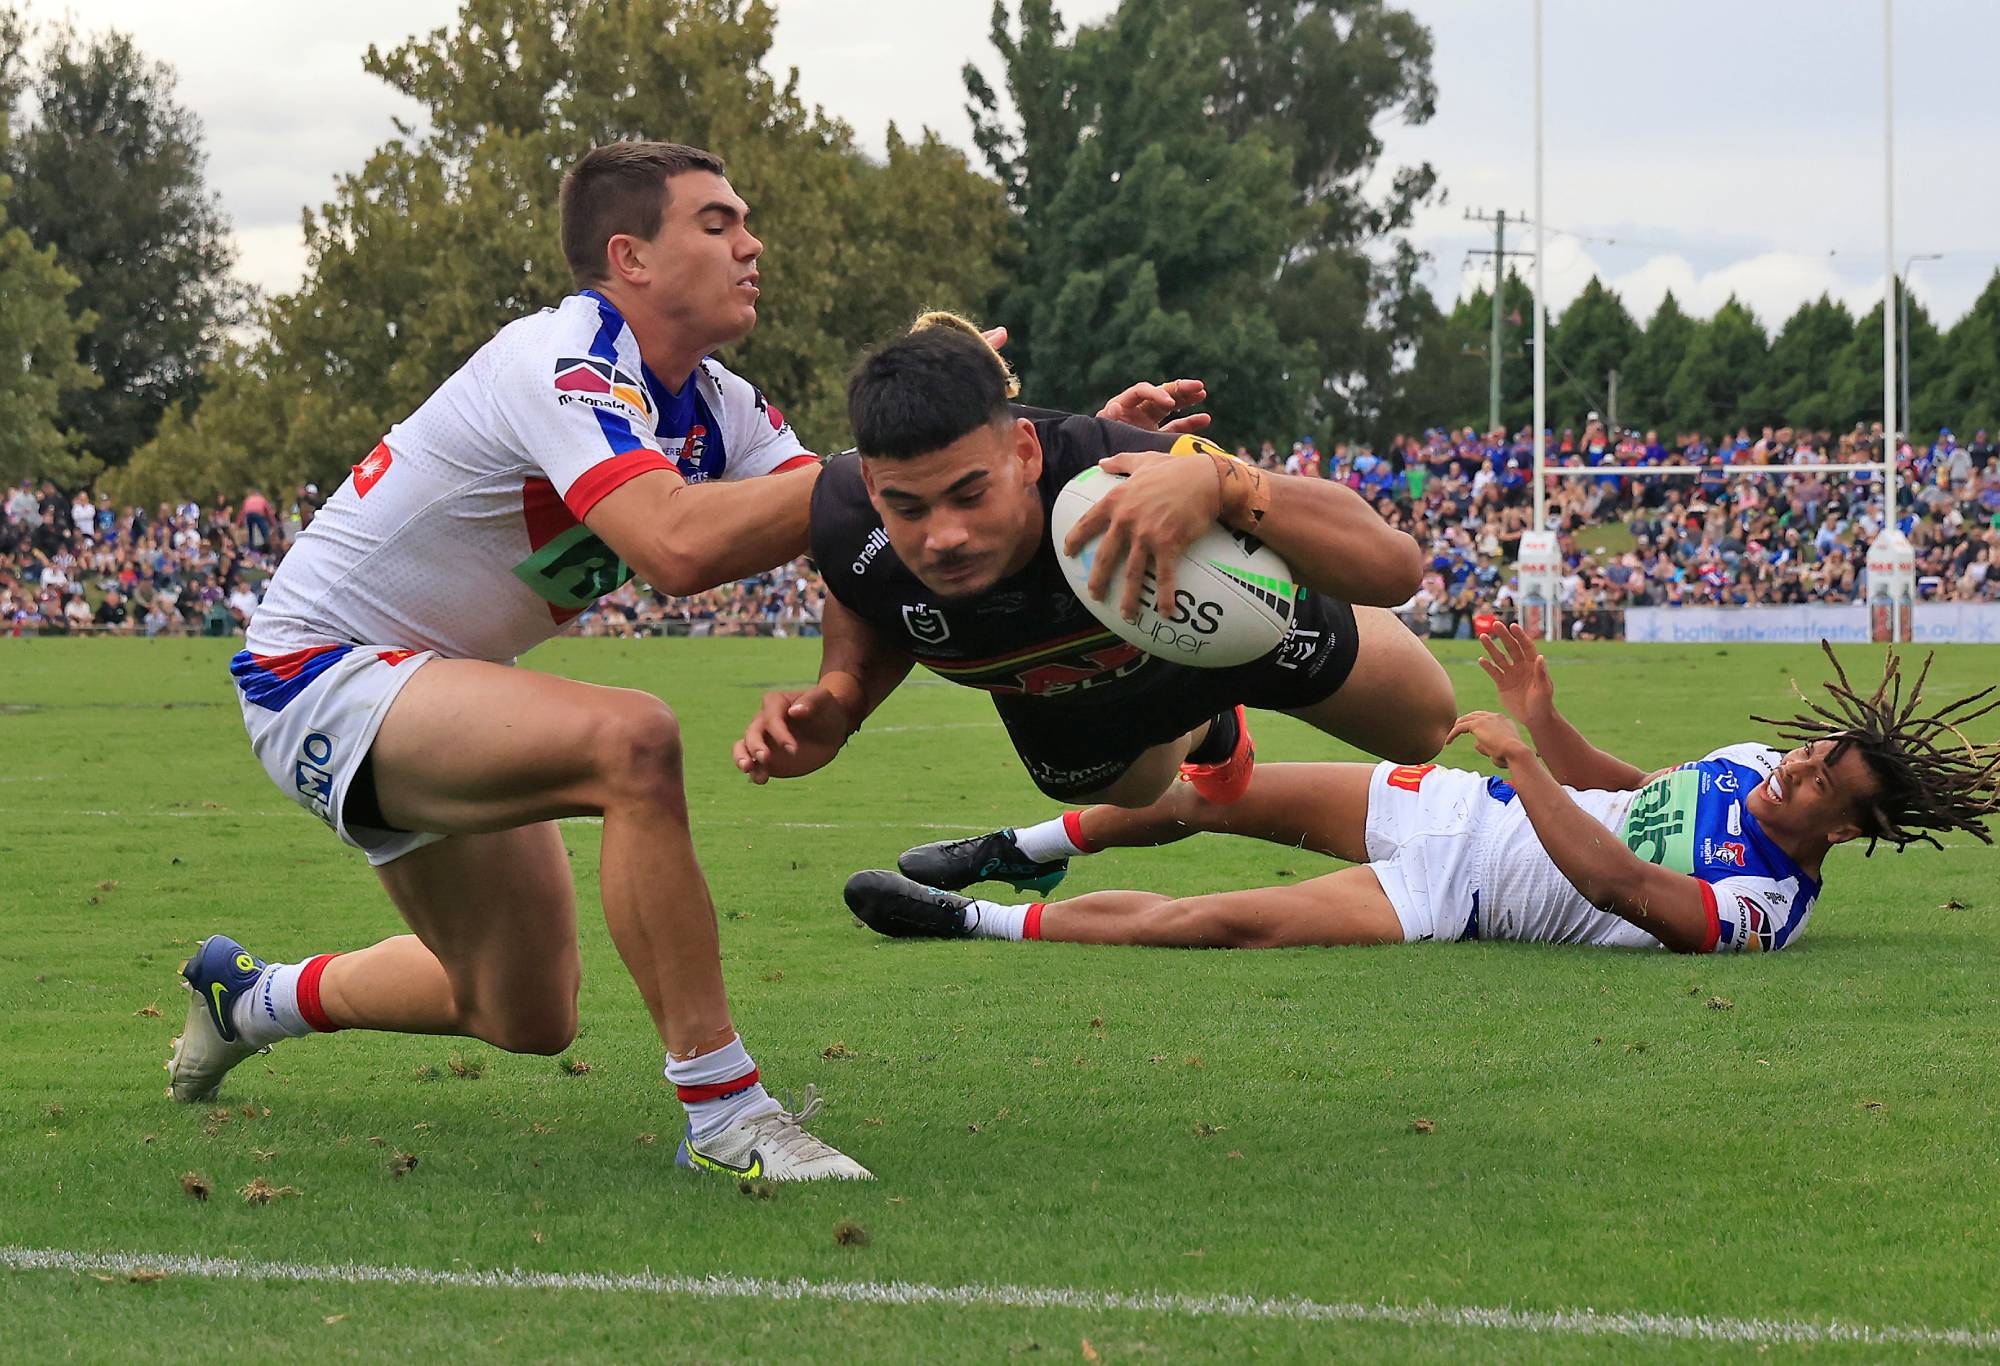 BATHURST, AUSTRALIA - MARCH 26: Taylor May of the Panthers scores a try during the round three NRL match between the Penrith Panthers and the Newcastle Knights at Carrington Park, on March 26, 2022, in Bathurst, Australia. (Photo by Mark Evans/Getty Images)